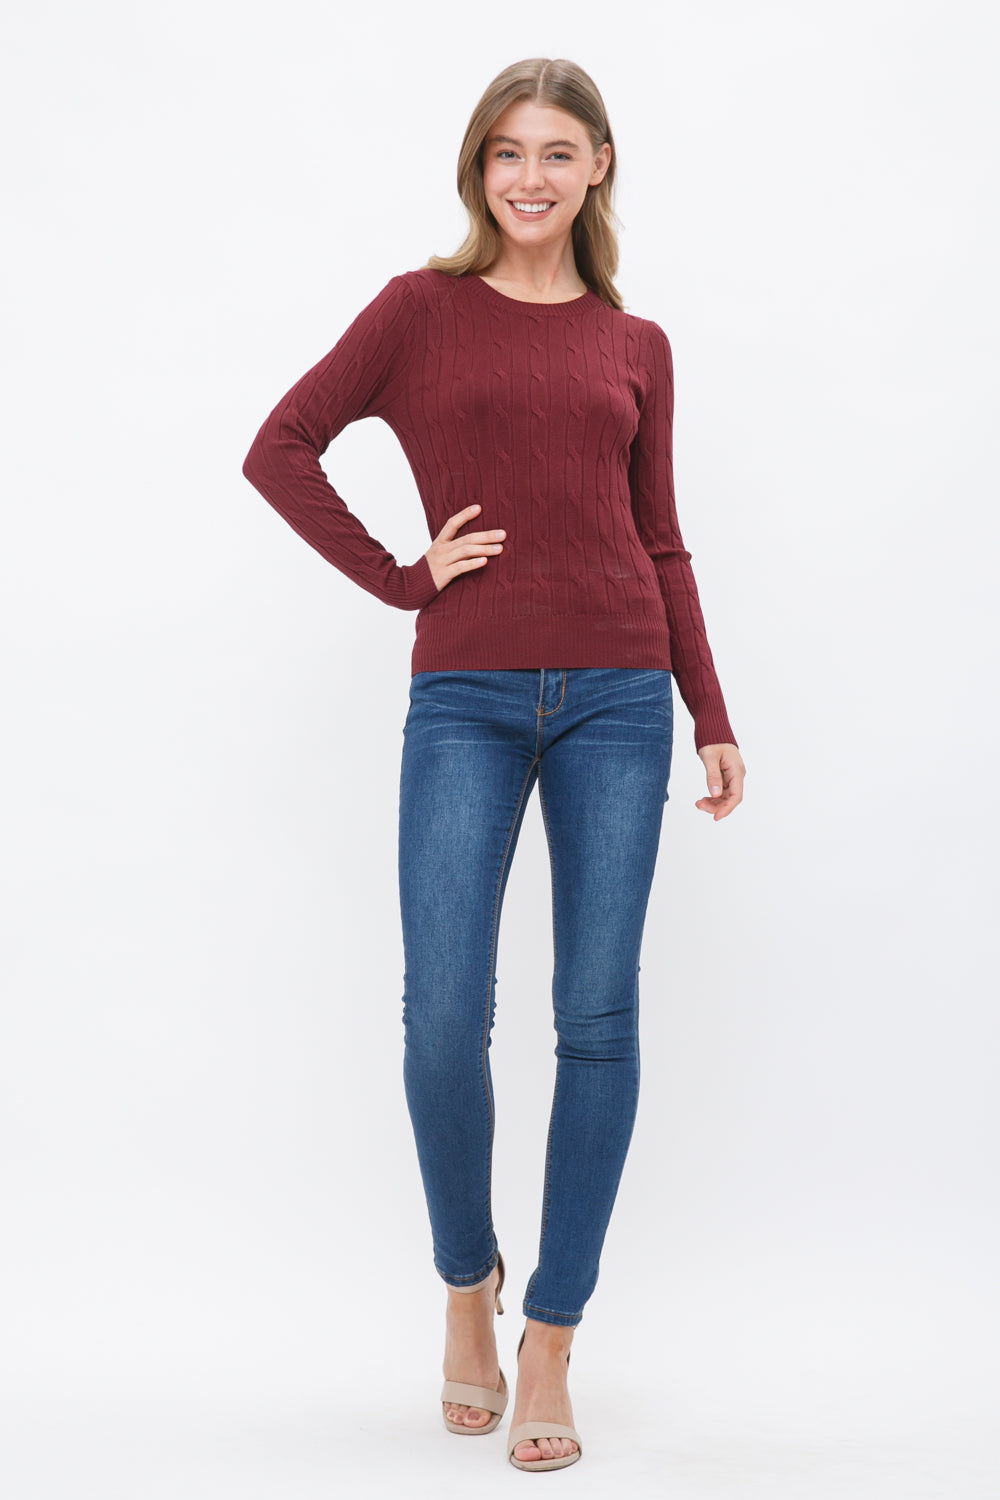 Cielo Women's Stretch Crew Neck Cable Knit Pullover - SW1000